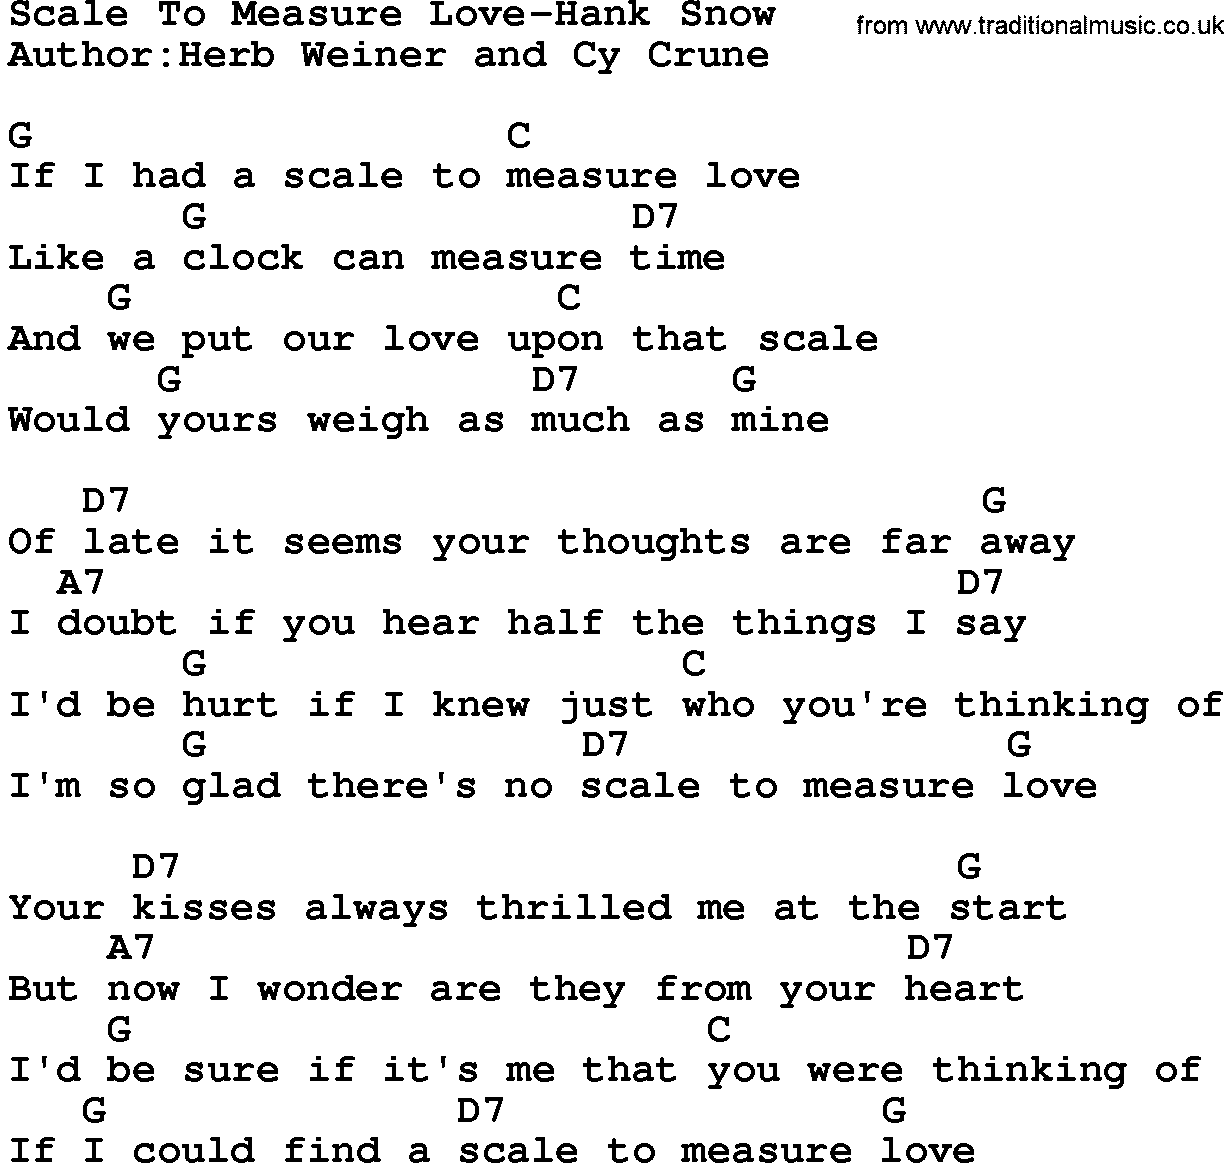 Country music song: Scale To Measure Love-Hank Snow lyrics and chords